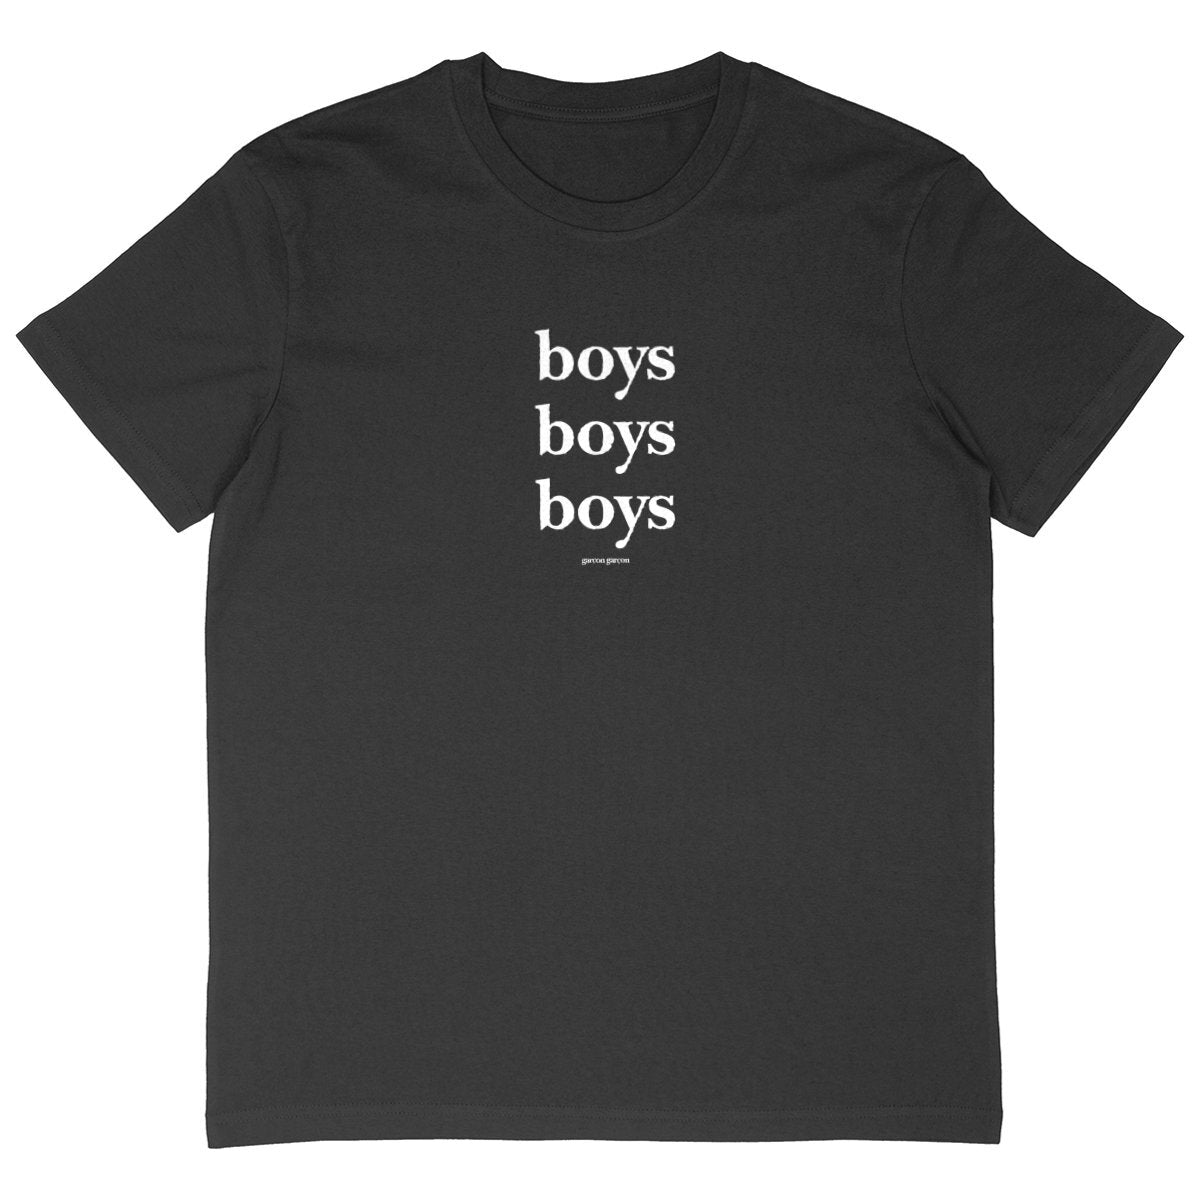 BOYS BOYS BOYS BLACK OVERSIZED TEE; BLACK tee oversized.garçon garçon tee oversize BLACK. Dive into the essence of Parisian cool with this oversized tee. The subtle 'garçon garçon' signature whispers a chic narrative, offering a slice of the city's famed elegance. Perfect for those who speak style with simplicity.